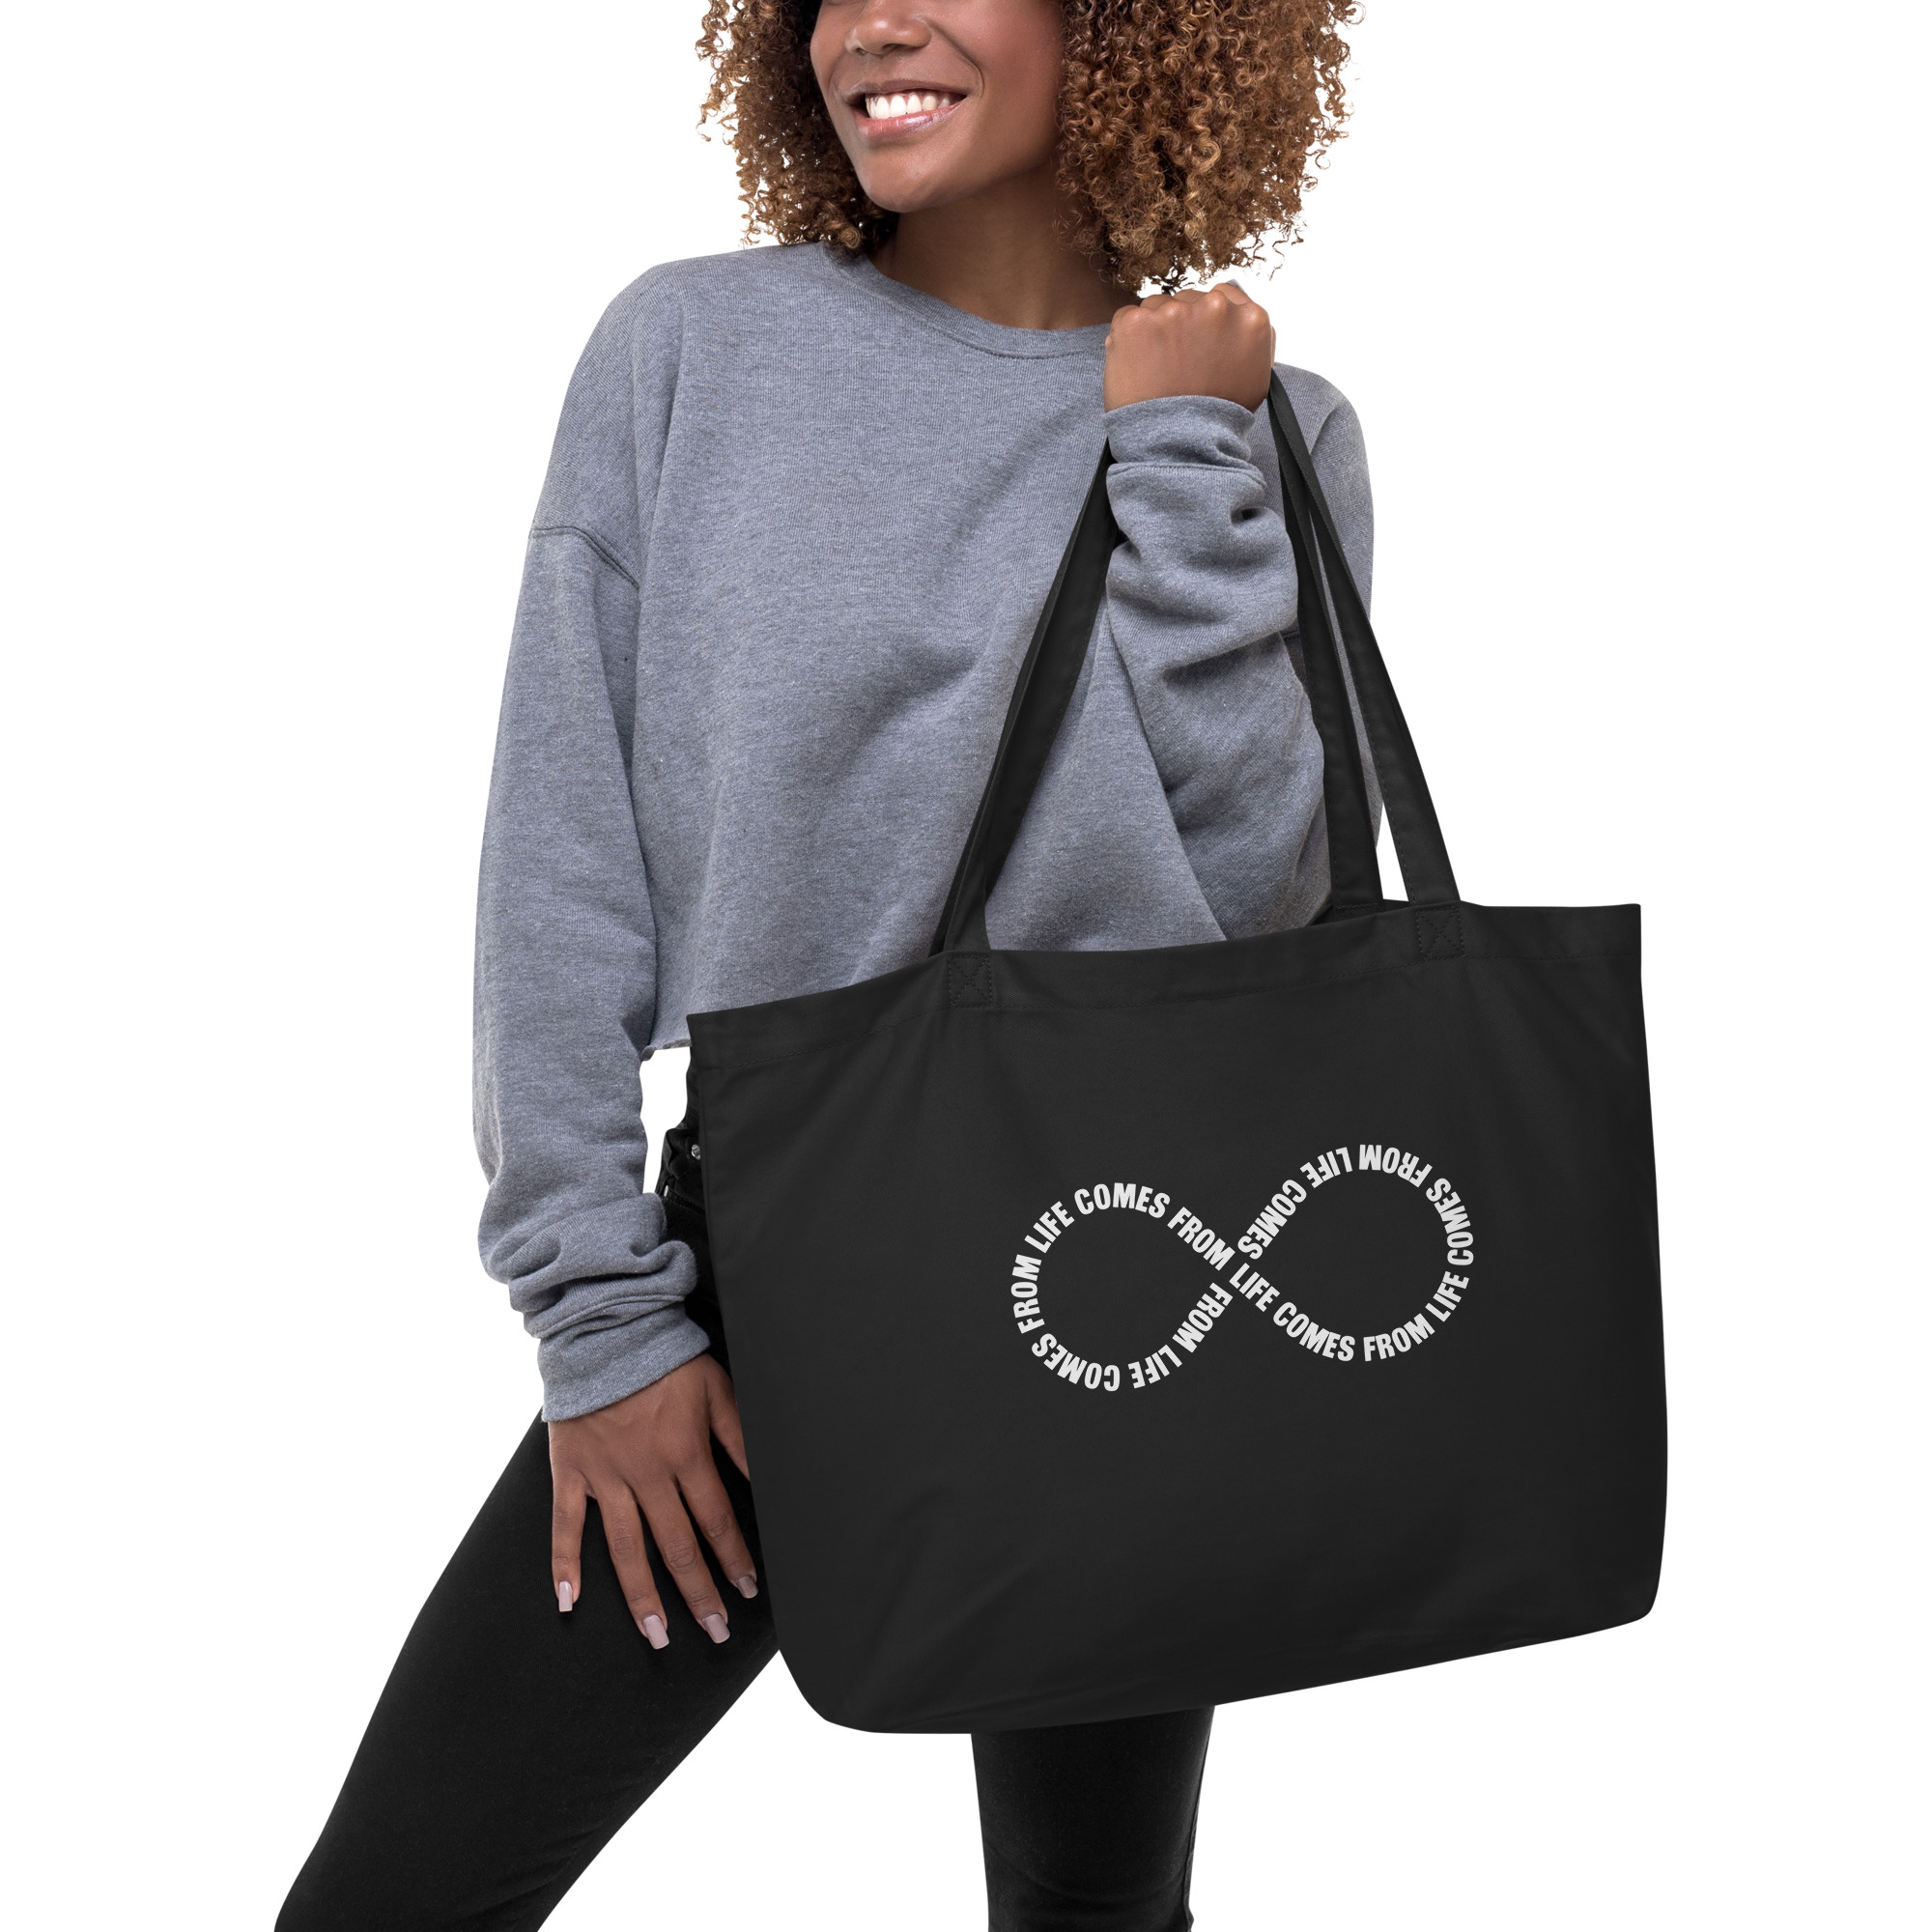 'Life Comes From Life' Large Organic Tote Bag